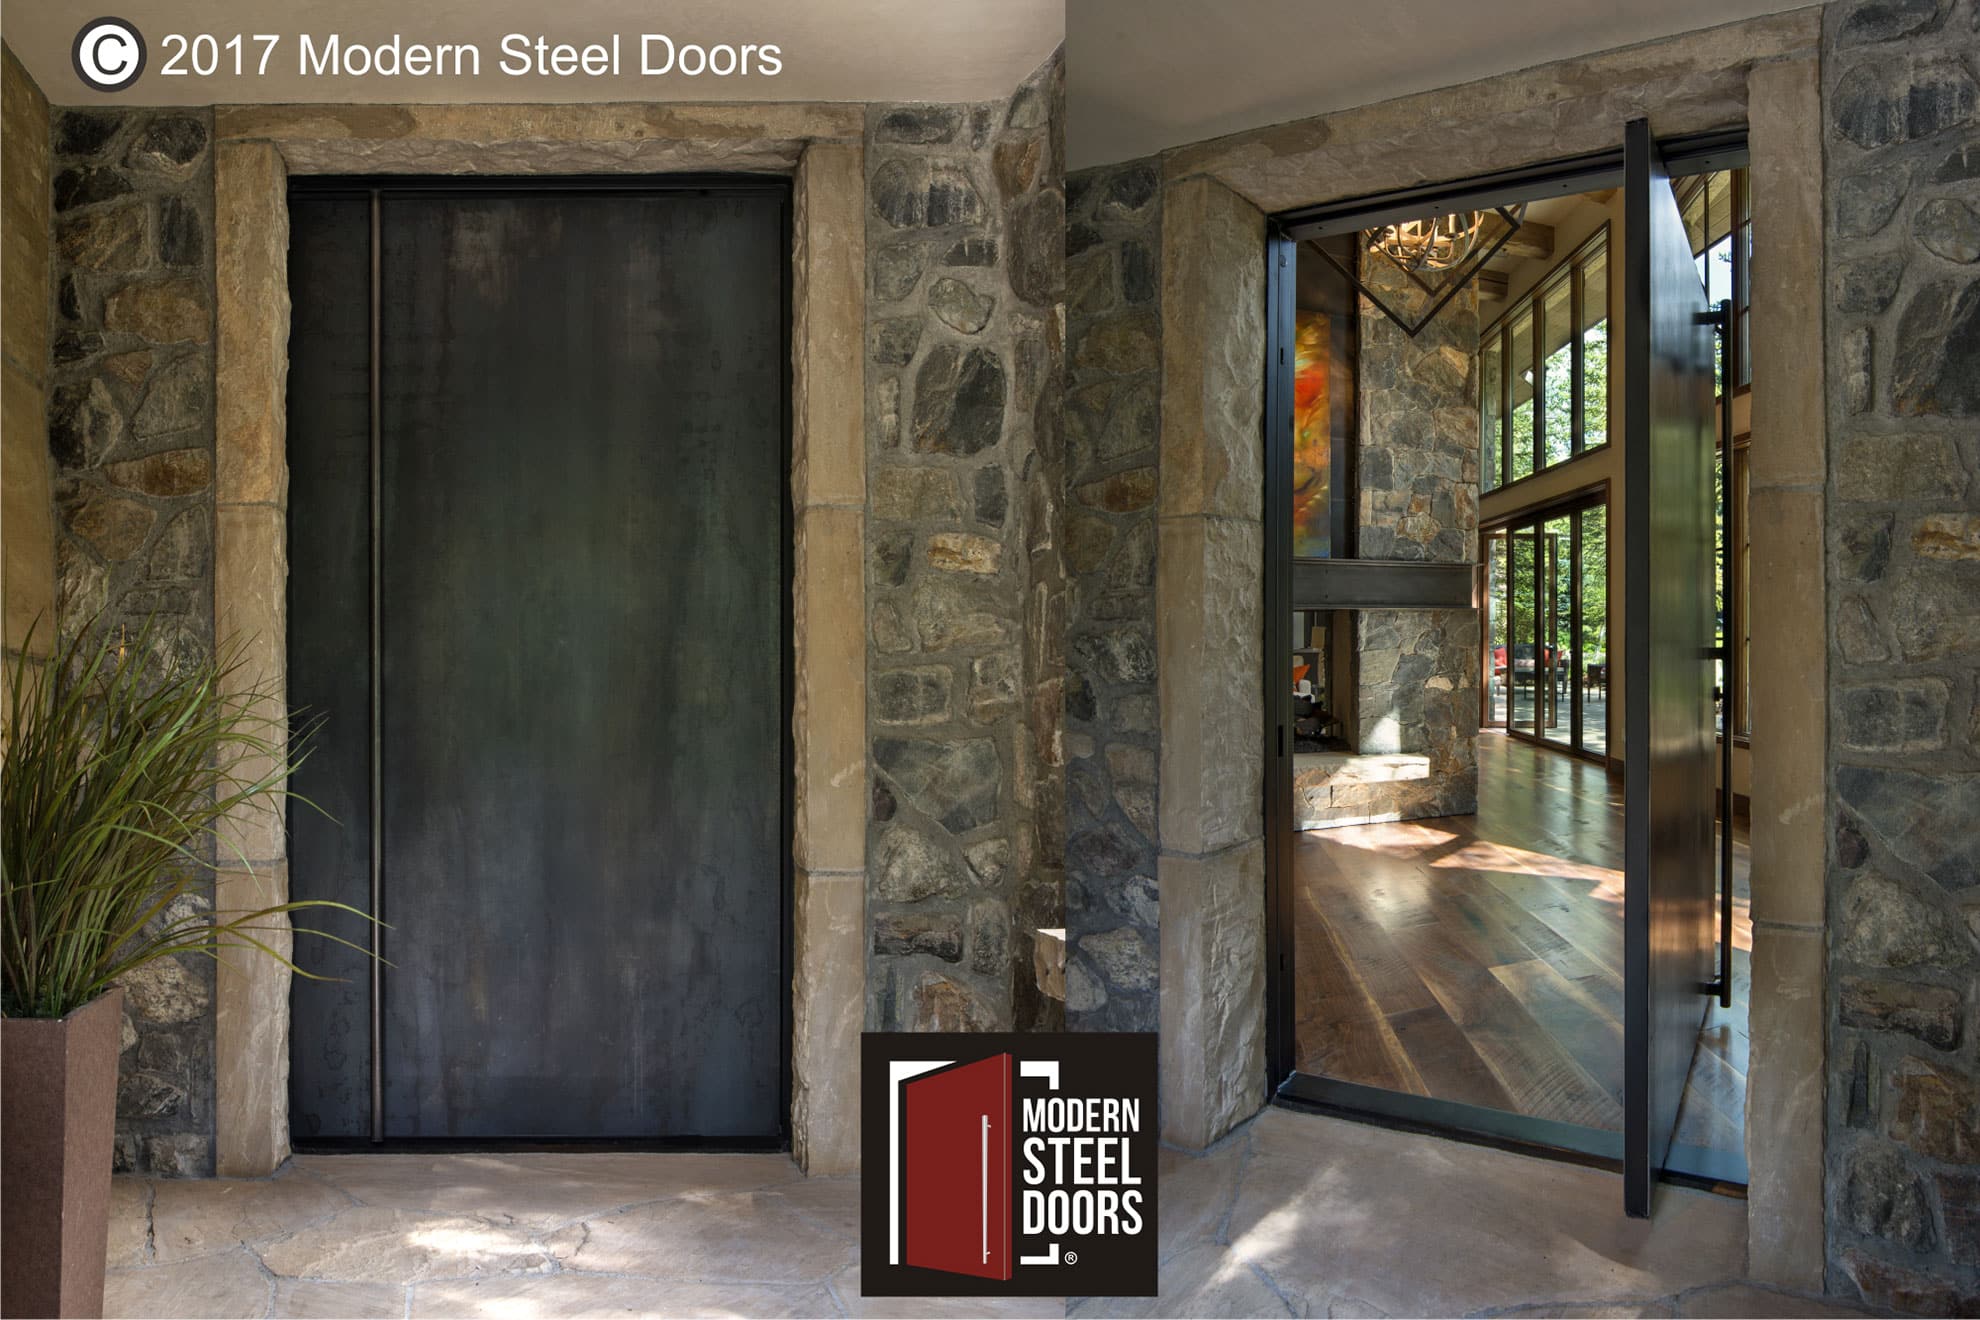 Client Statements And Photo Gallery Modern Steel Doors